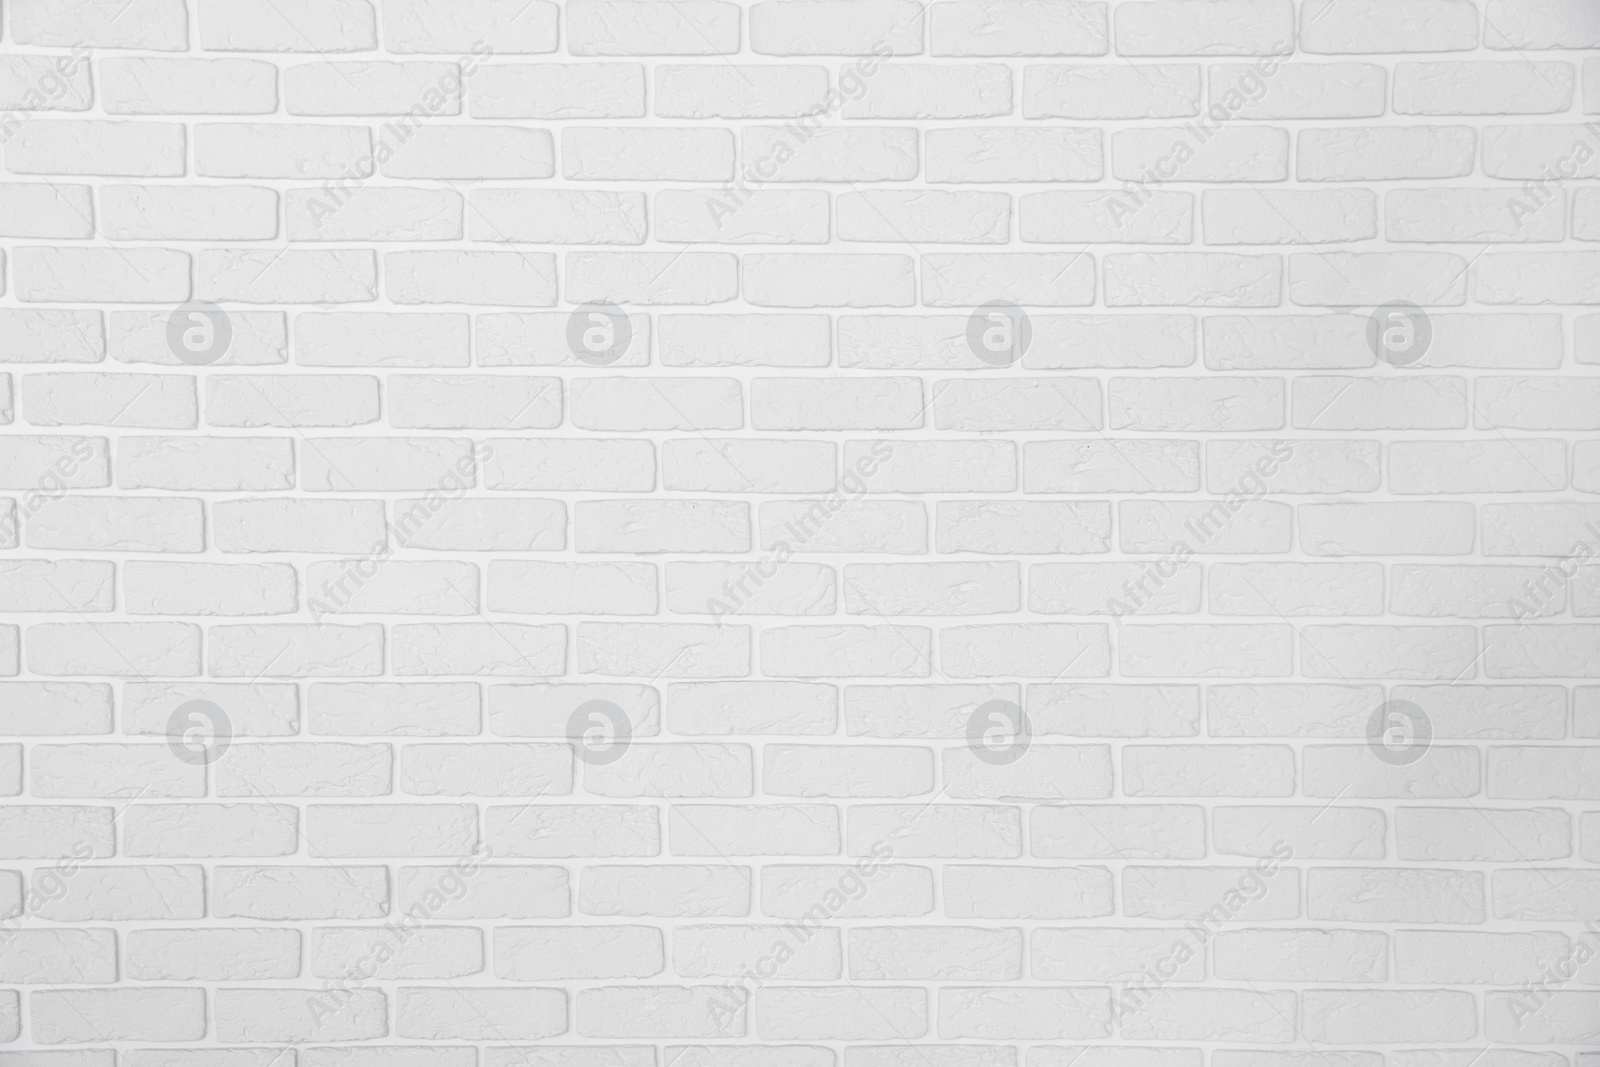 Photo of Decorative white bricks with tile leveling system on wall